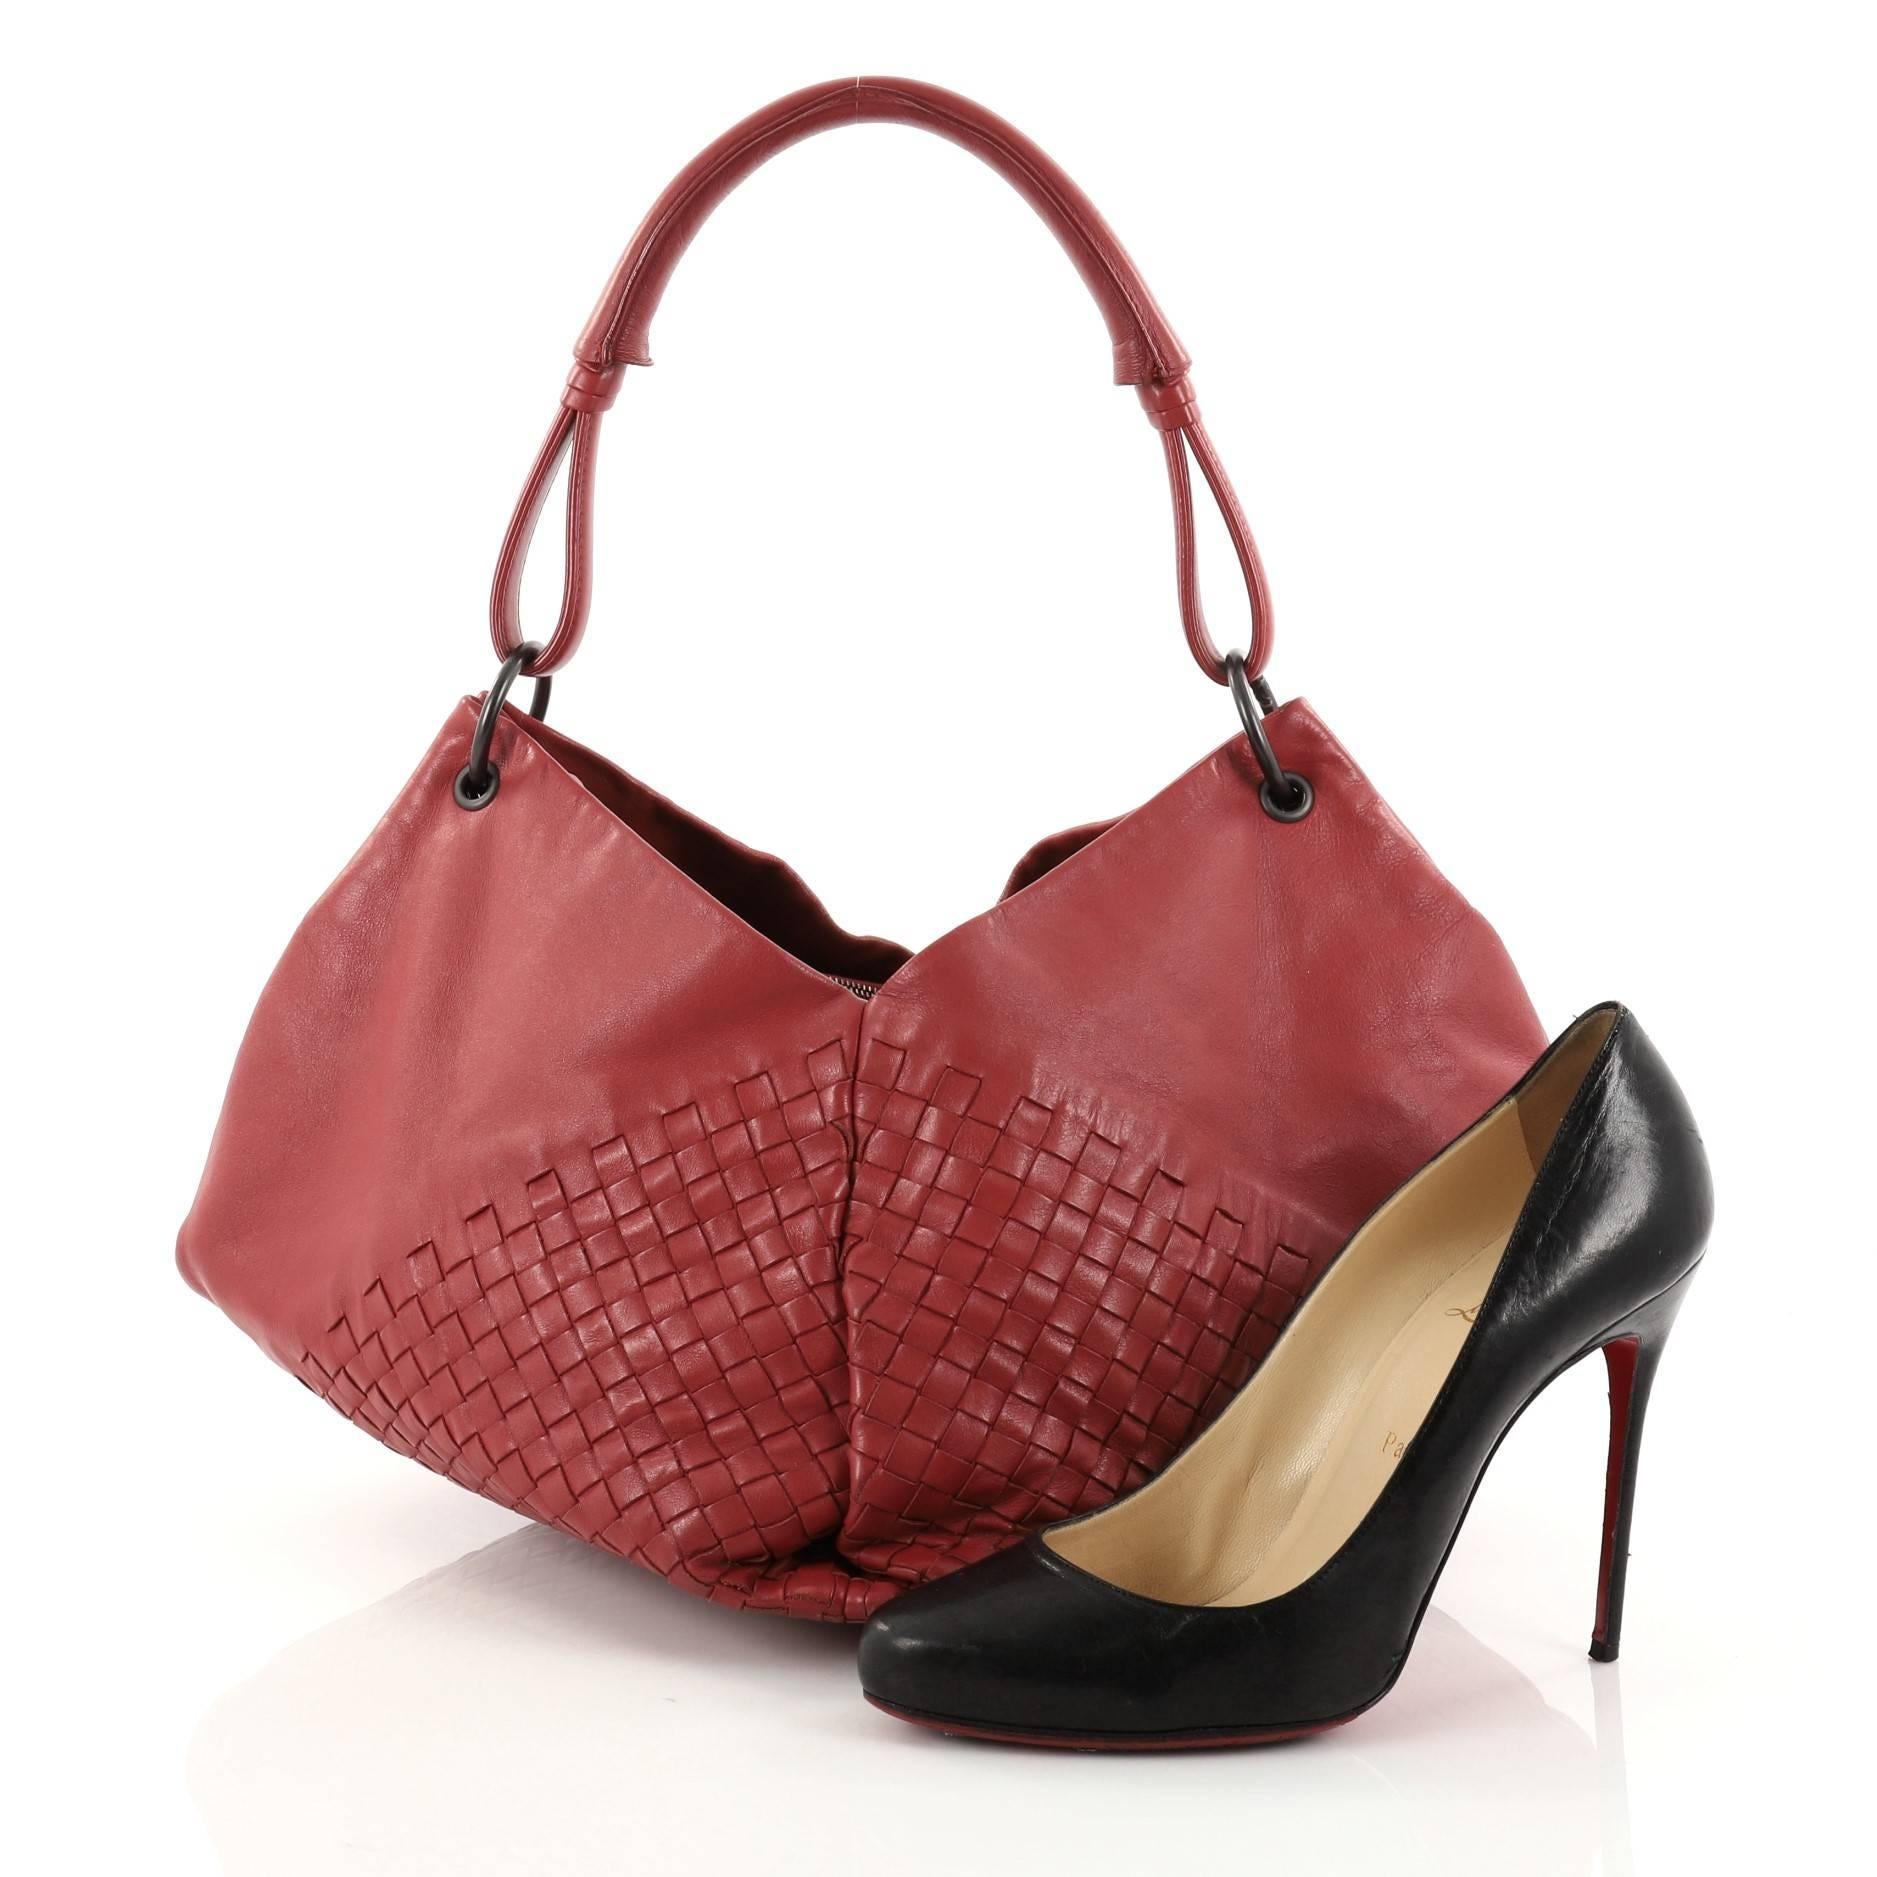 This authentic Bottega Veneta Aquilone Fortune Cookie Hobo Intrecciato Nappa Small is a gorgeous bag that's perfect for your everyday looks. Crafted from red intrecciato nappa leather, this stylish bag features looping leather handle, Bottega's